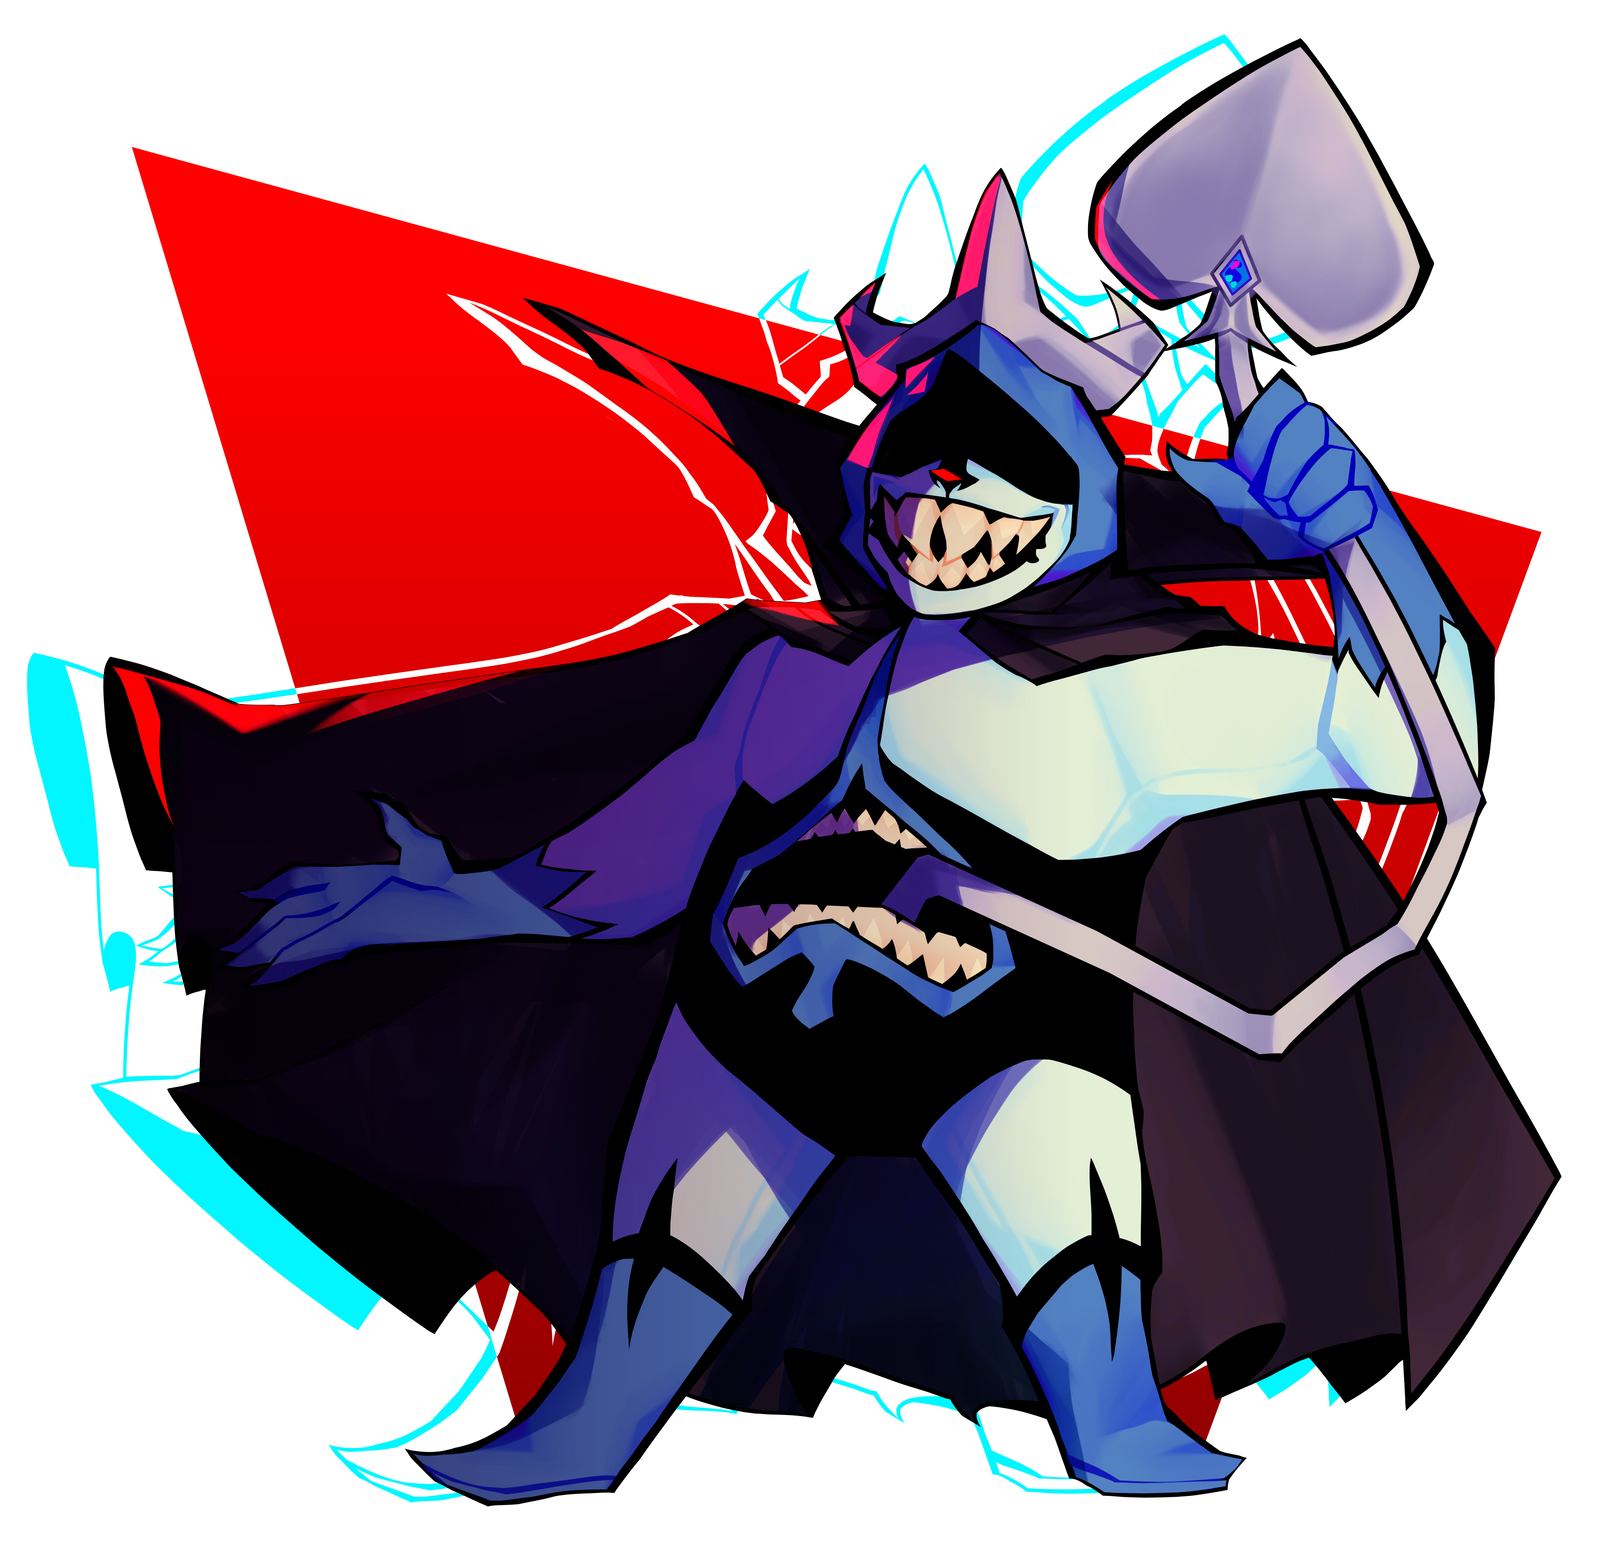 __deltarune_spade_king___by_7greentears_dcsq4on-fullview.png